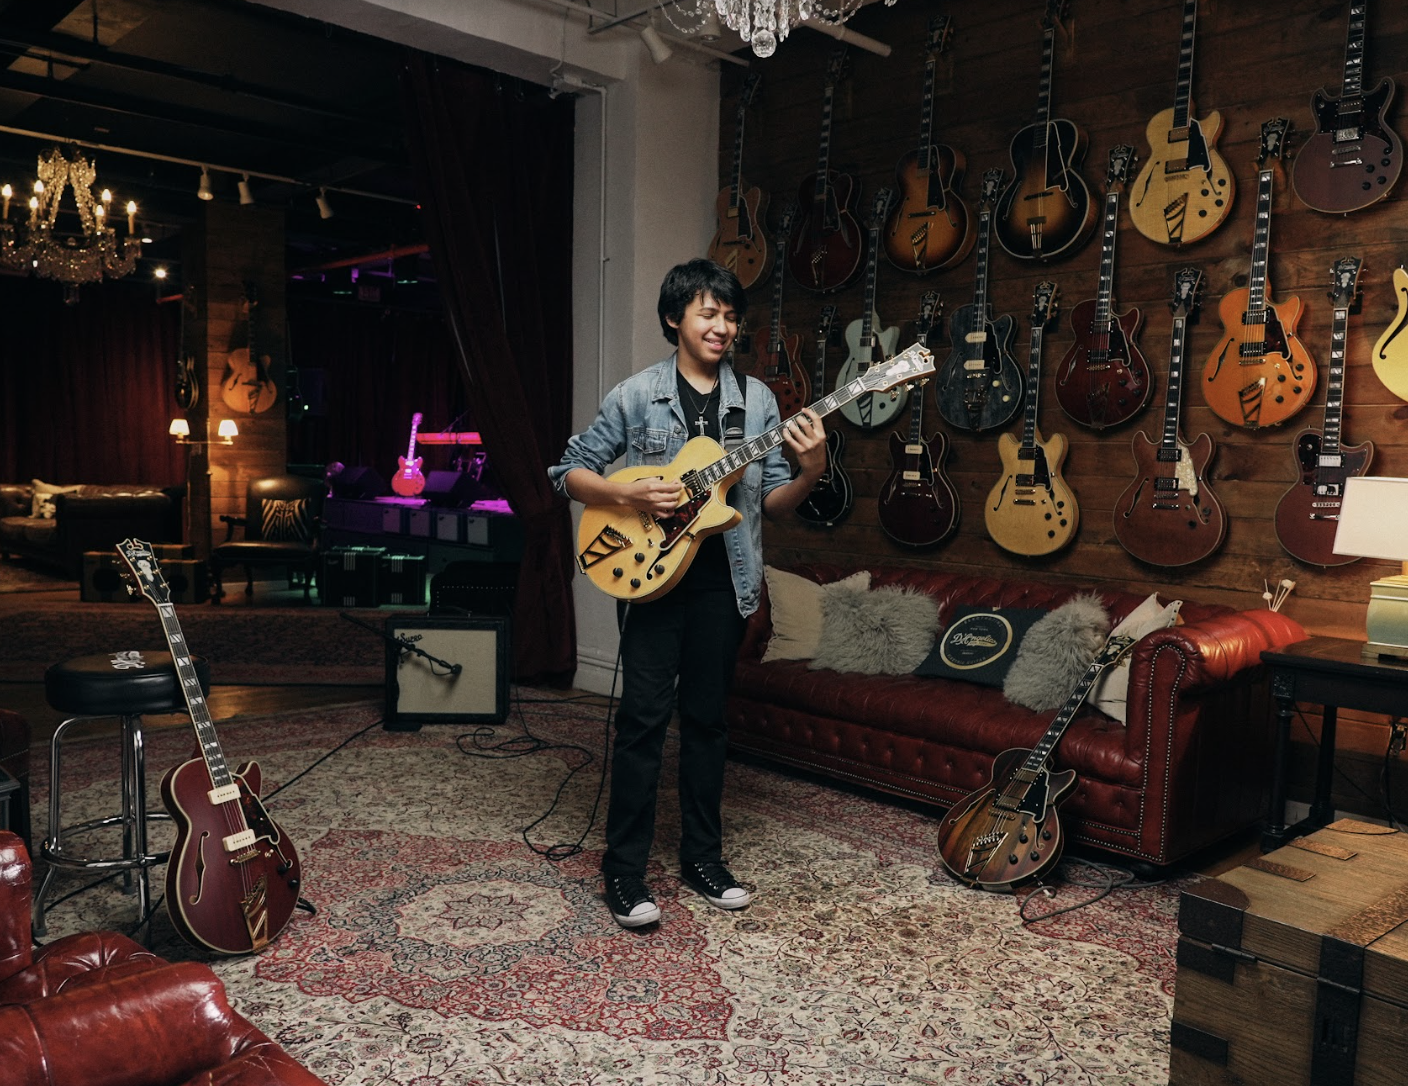 Catching up with Justin Lee Schultz - D'Angelico Guitars